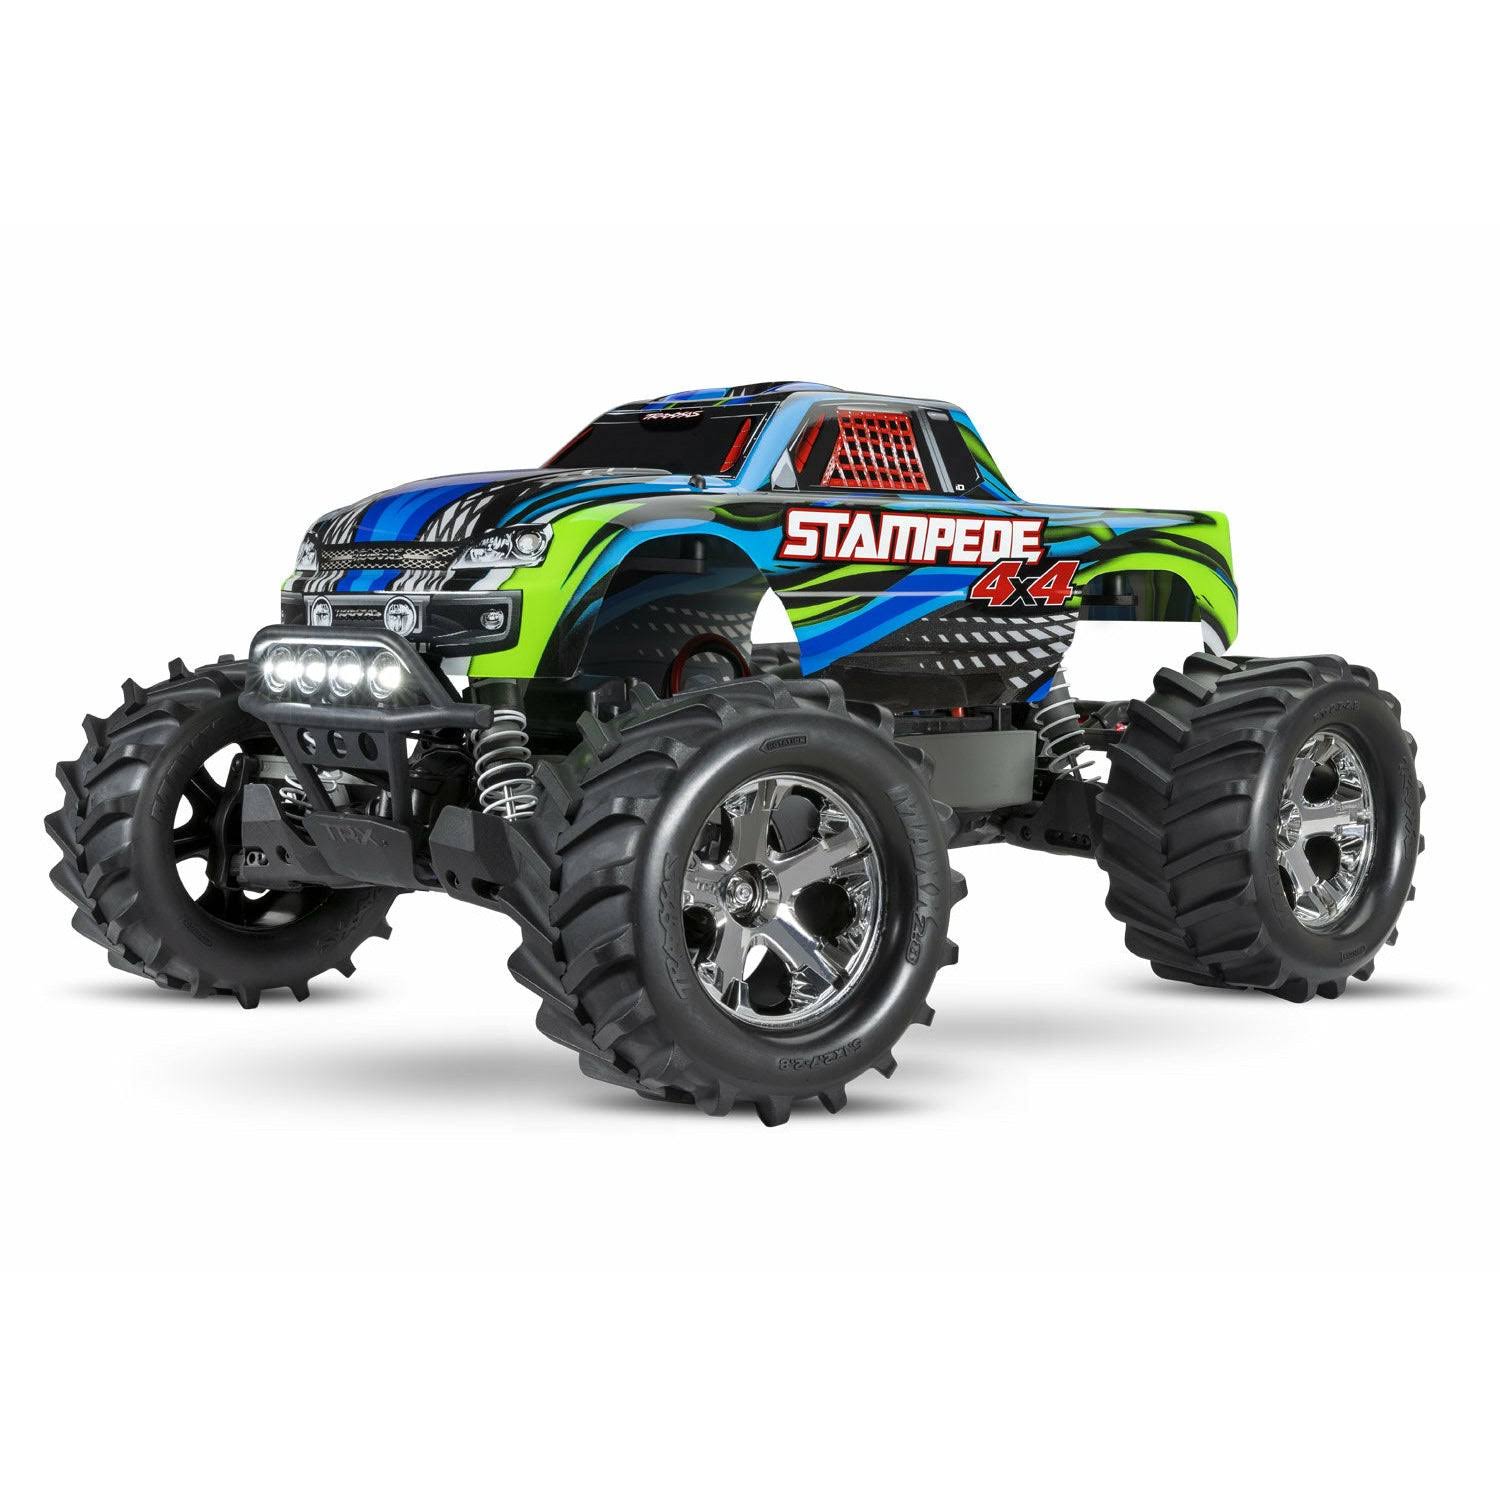 Traxxas Stampede 4x4 1/10 Monster Truck RTR TQ - LED (Blue)